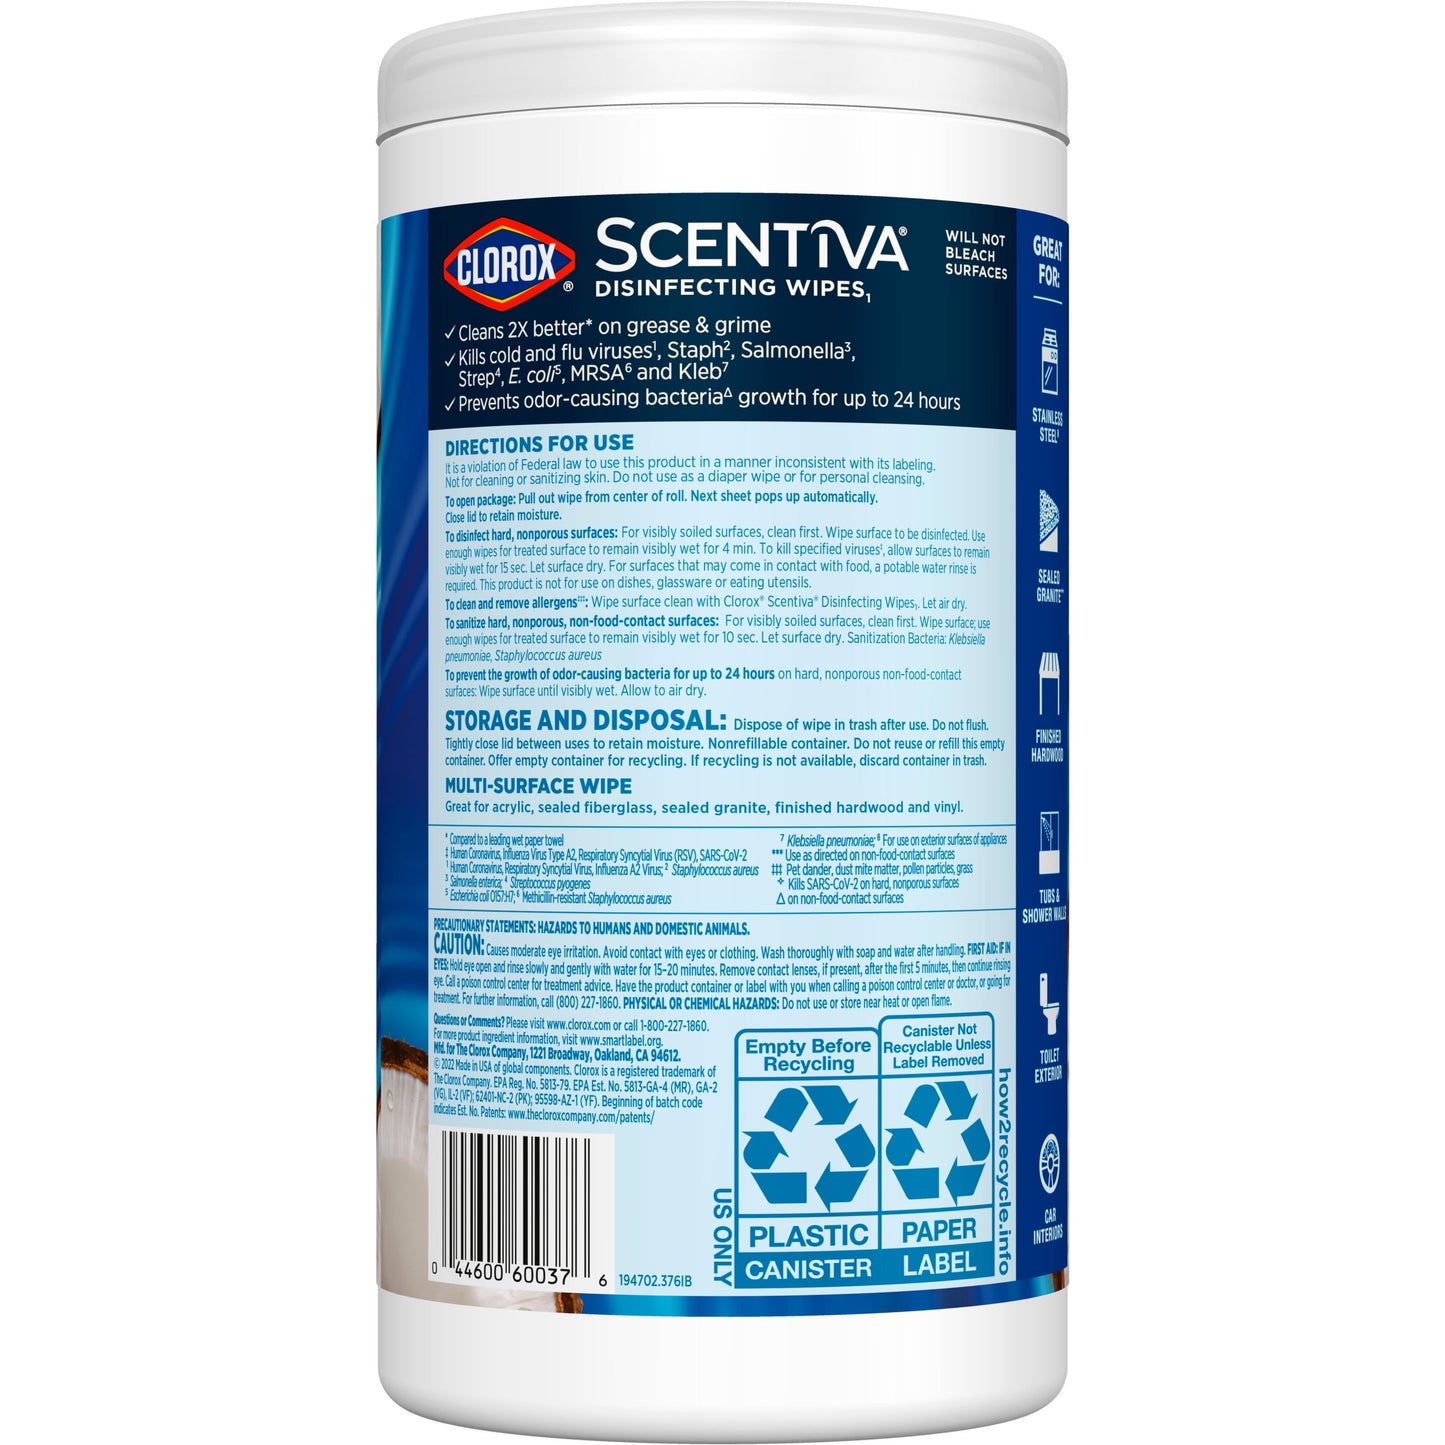 Clorox Scentiva Bleach-Free Cleaning Wipes, Coconut and Waterlily, 75 Count